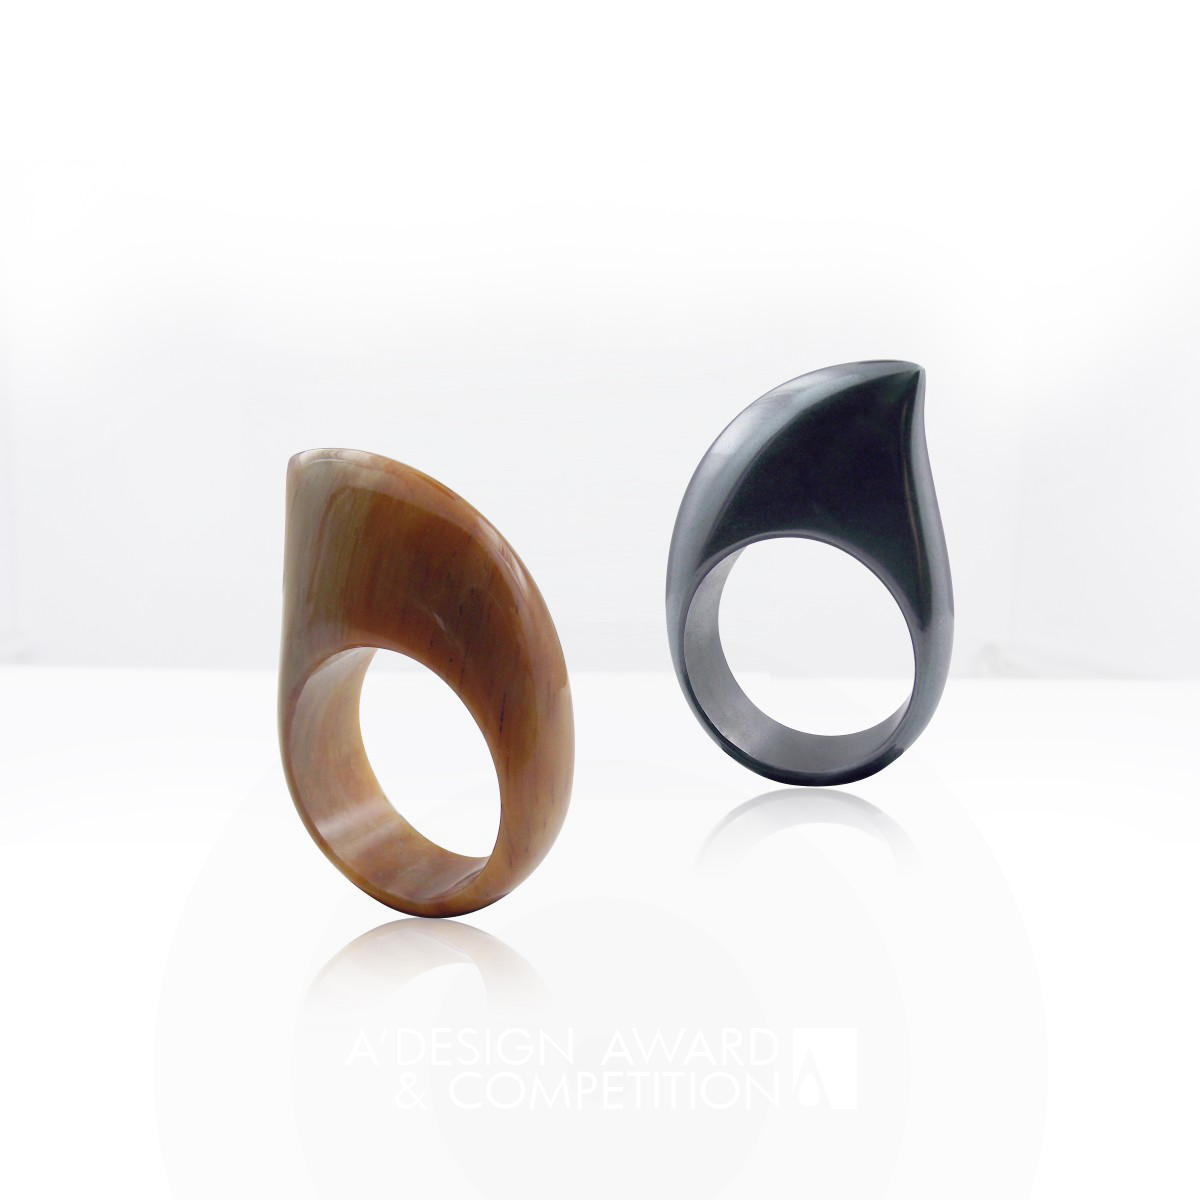 SHARK Stone Ring by Ting G